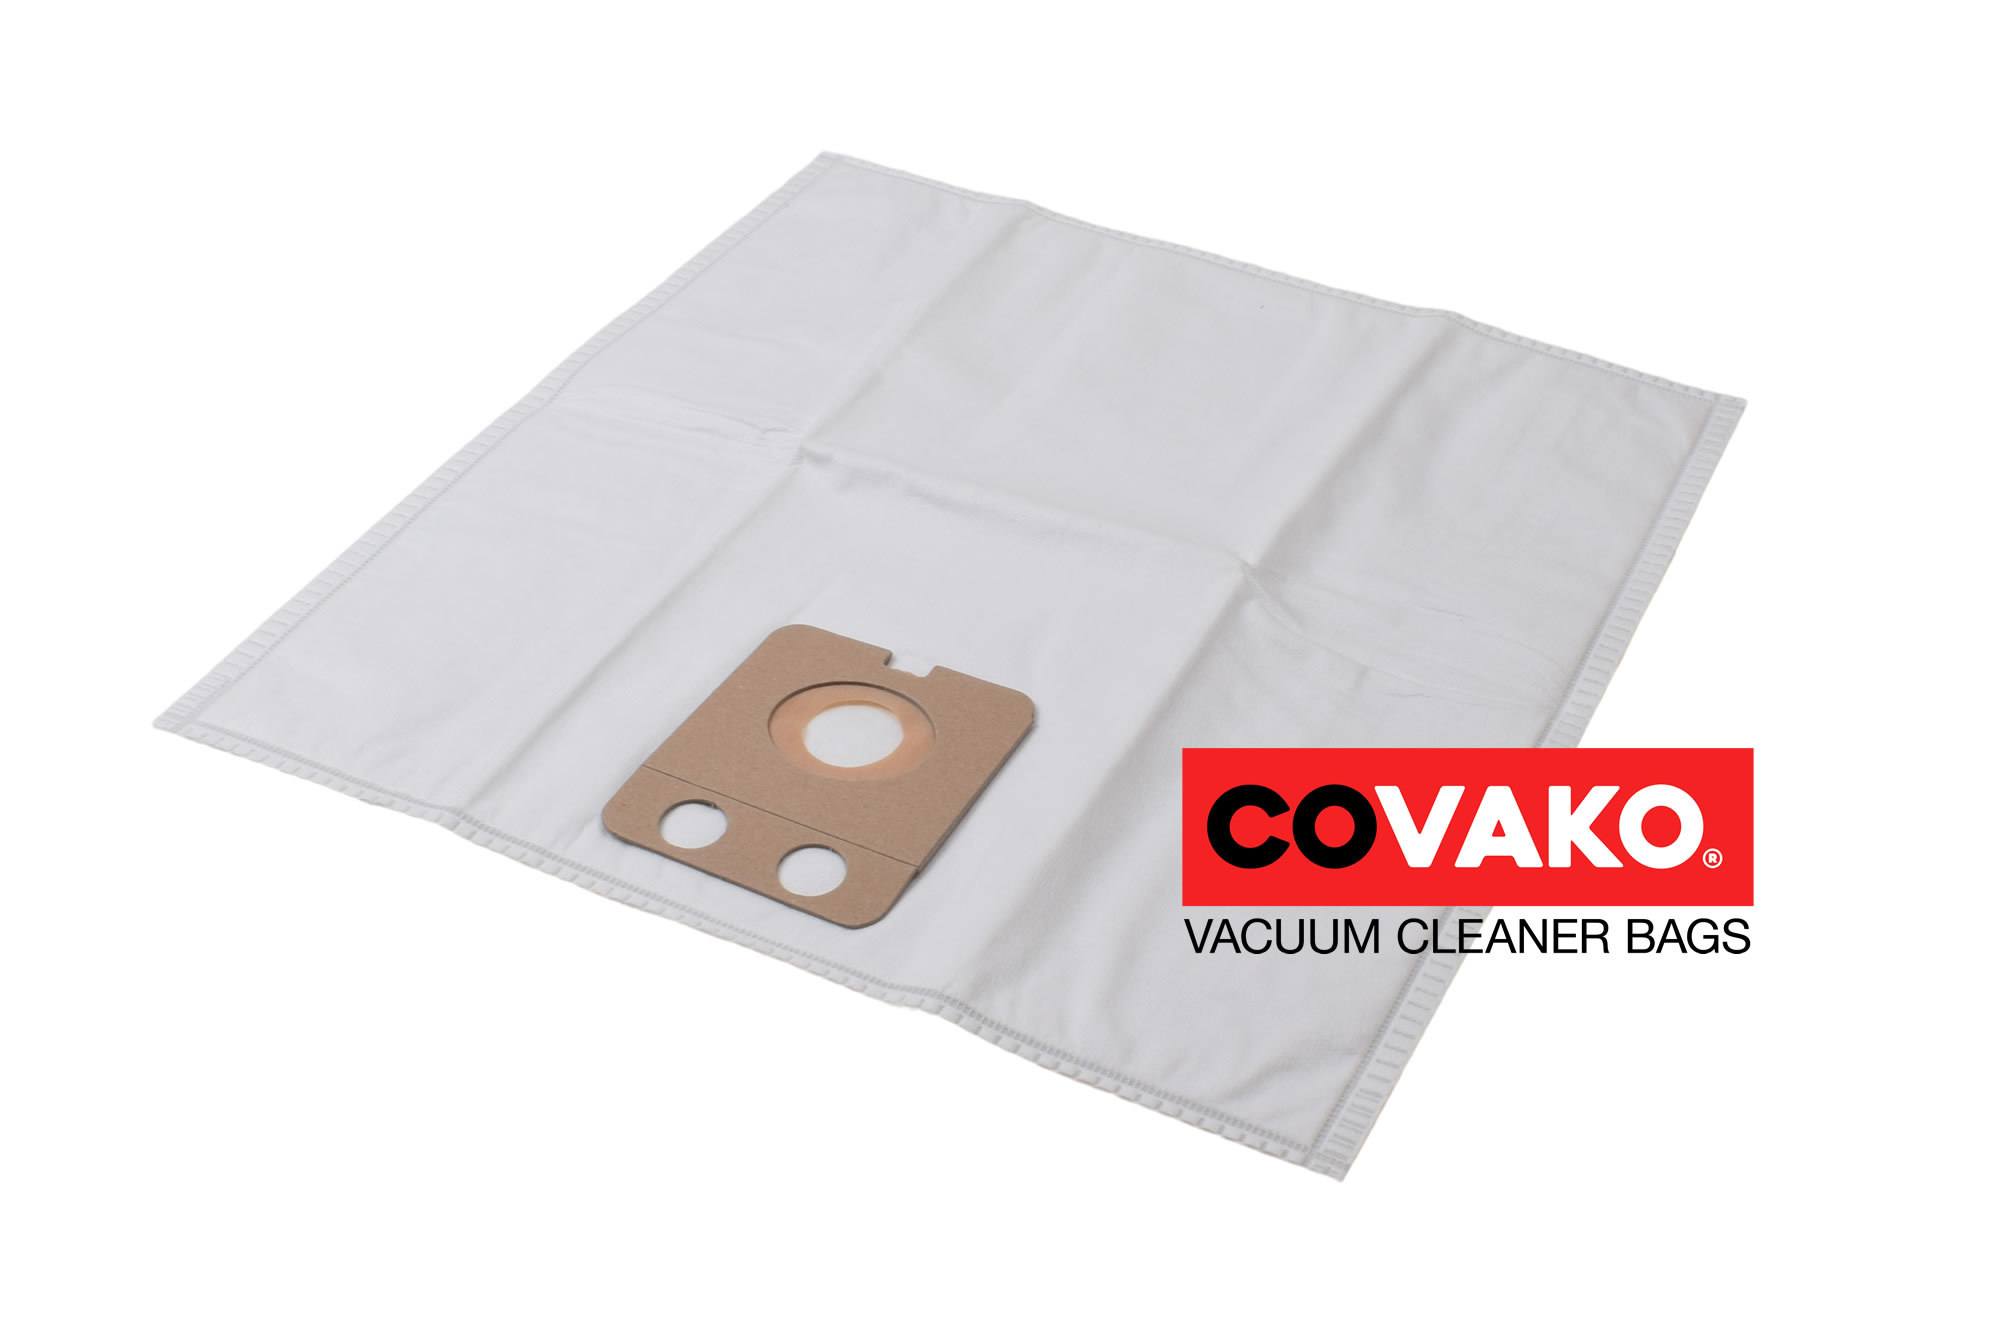 Alto 82367810 / Synthesis - Alto vacuum cleaner bags